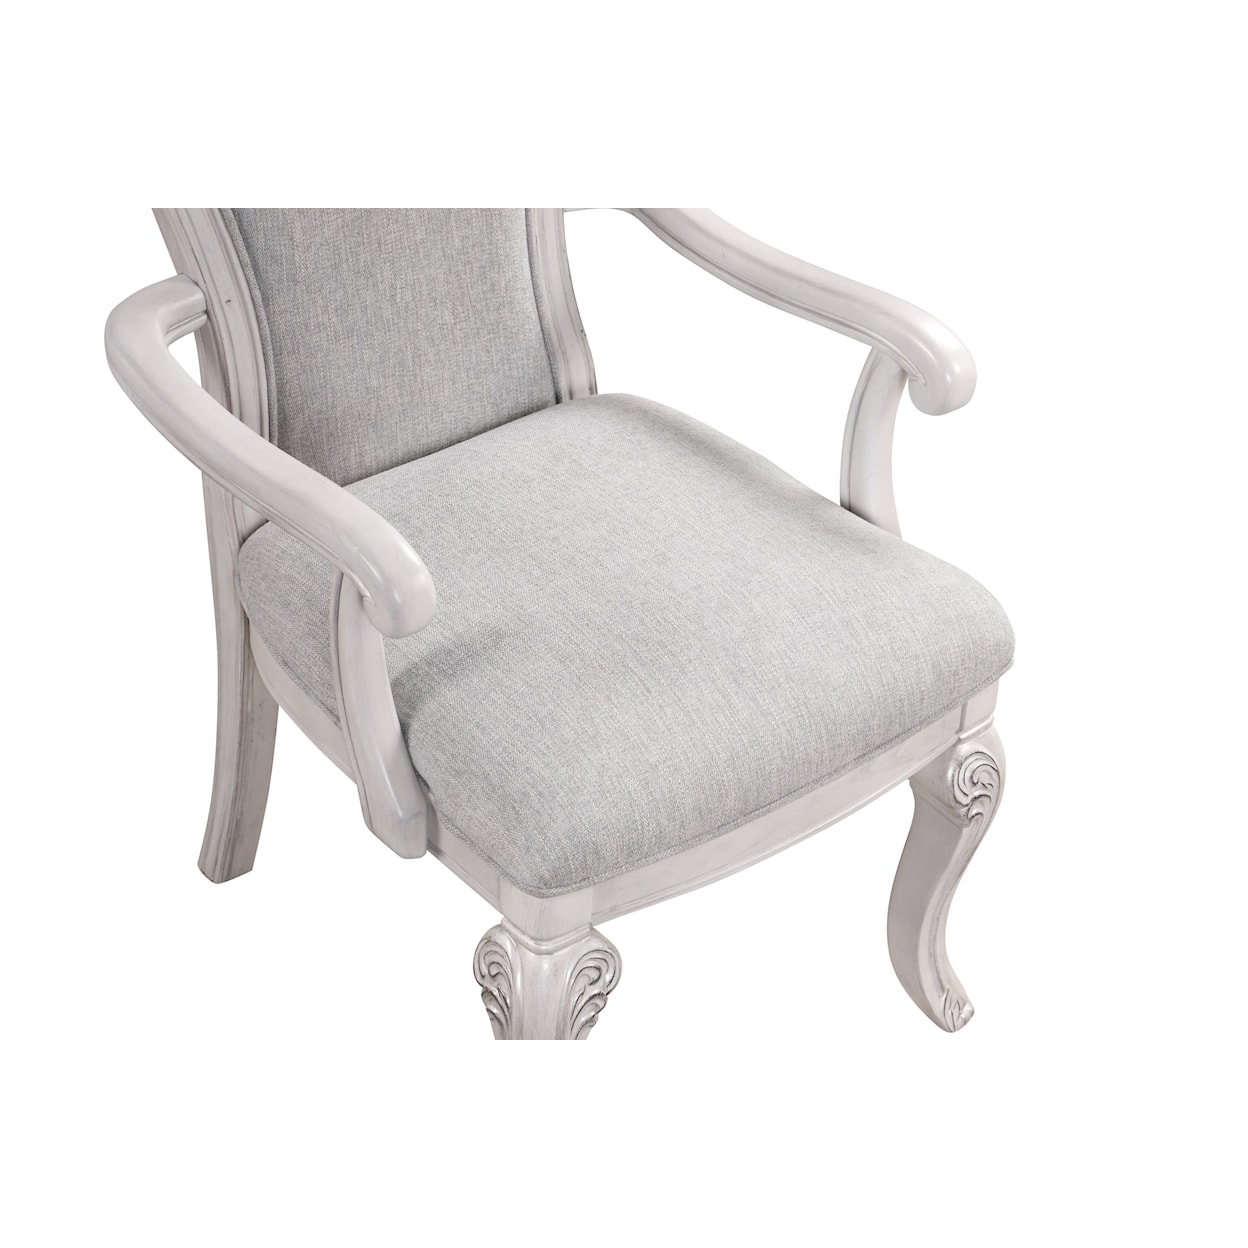 New Classic Furniture Cambria Hills Upholstered Arm Chair